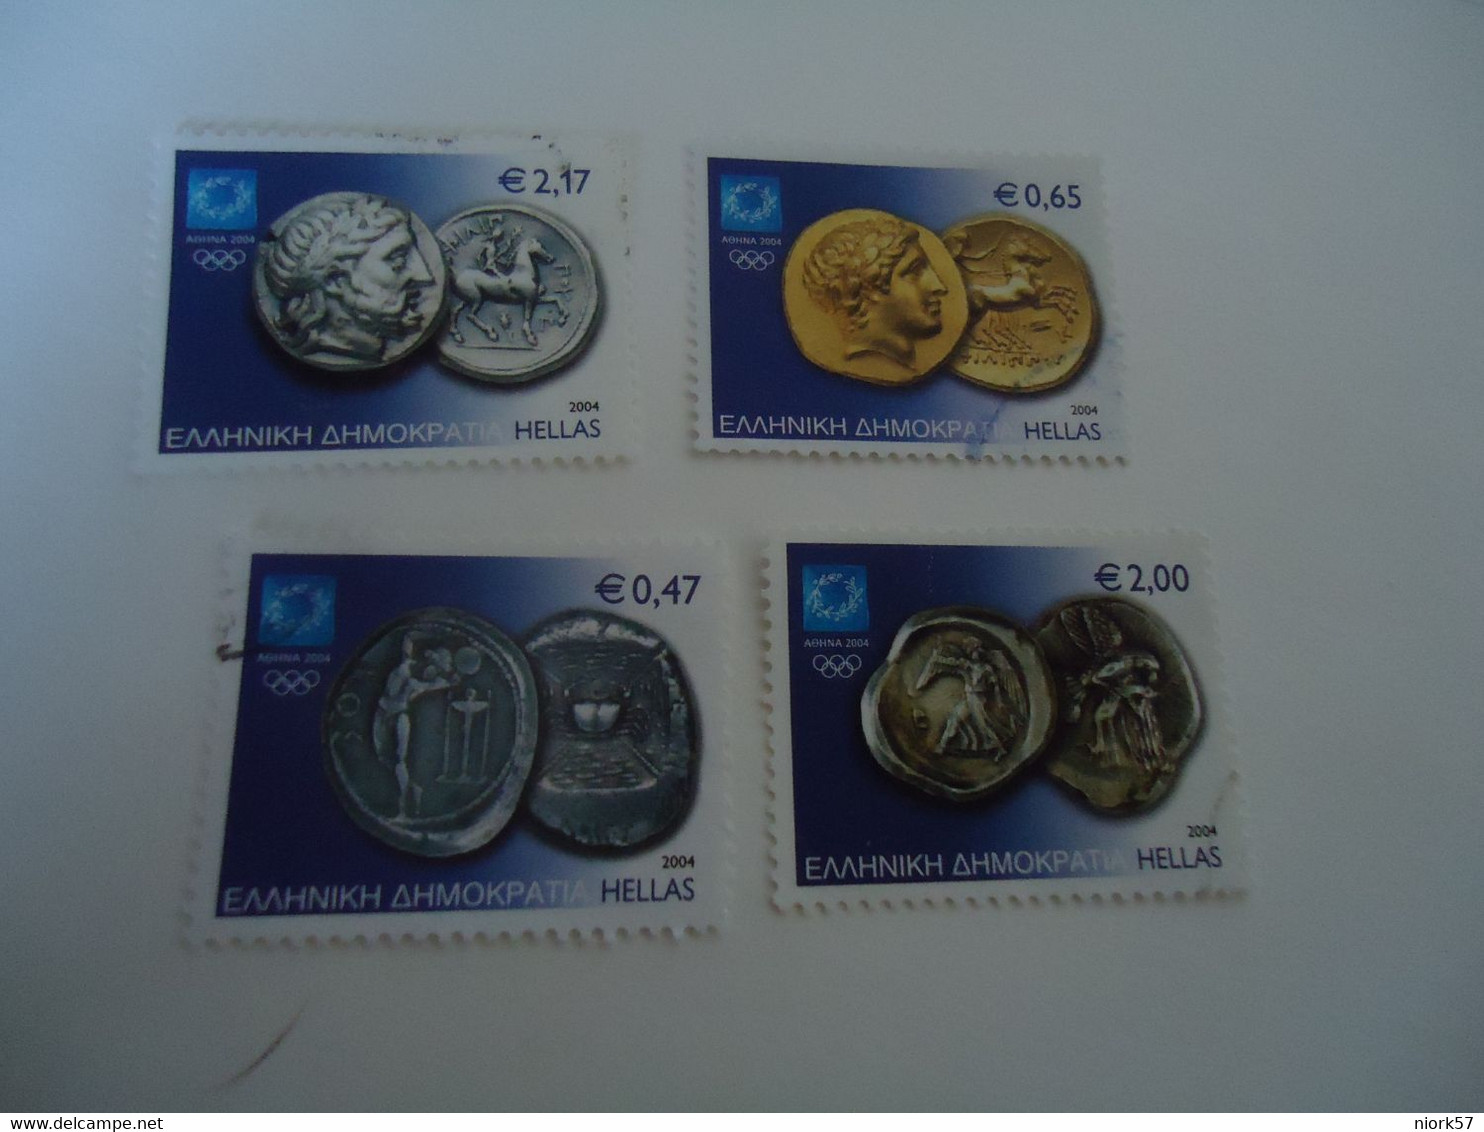 GREECE USED STAMPS  SET  2004 OLYMPIC GAMES  ATHENS   COINS ATHLETES - Verano 2004: Atenas - Paralympic